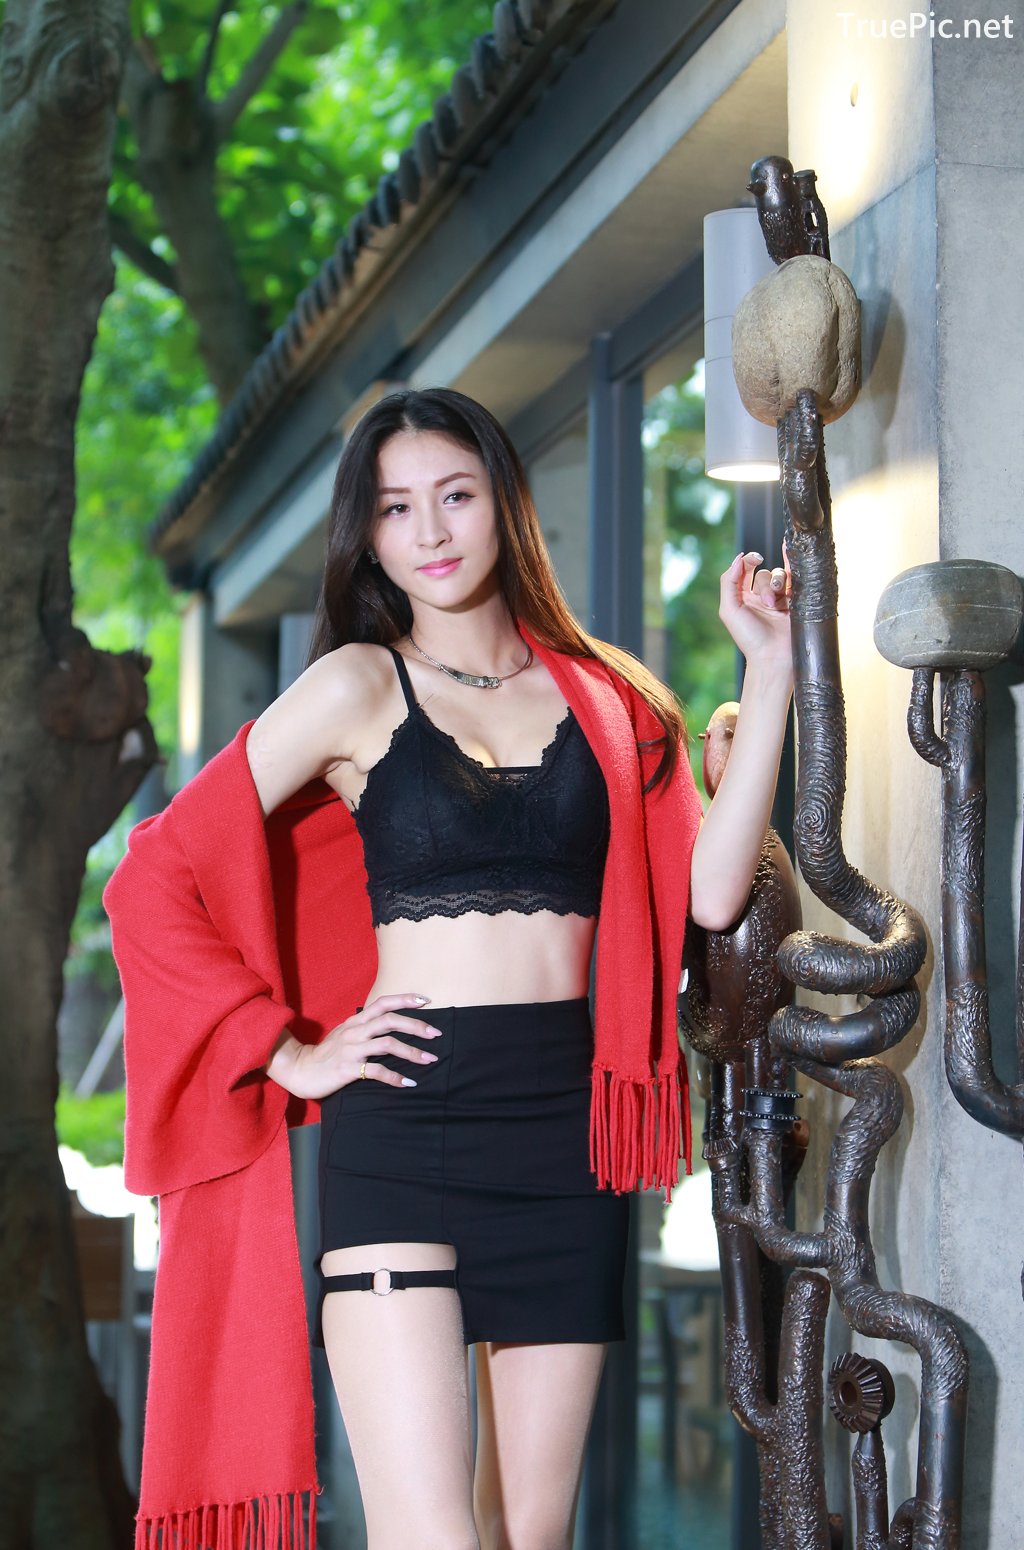 Image-Taiwanese-Beautiful-Long-Legs-Girl-雪岑Lola-Black-Sexy-Short-Pants-and-Crop-Top-Outfit-TruePic.net- Picture-43